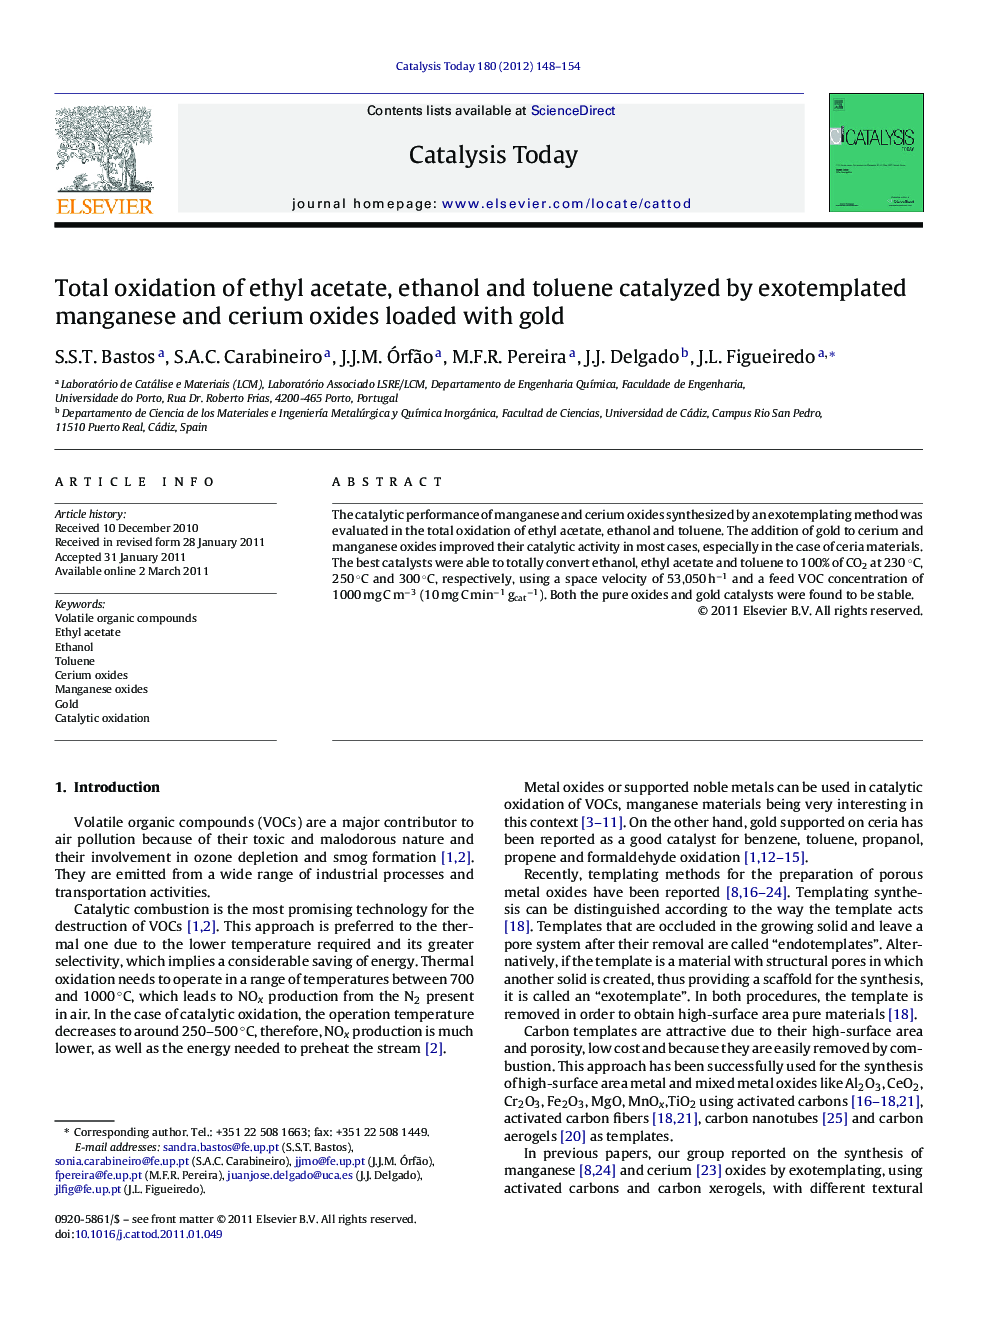 Total oxidation of ethyl acetate, ethanol and toluene catalyzed by exotemplated manganese and cerium oxides loaded with gold